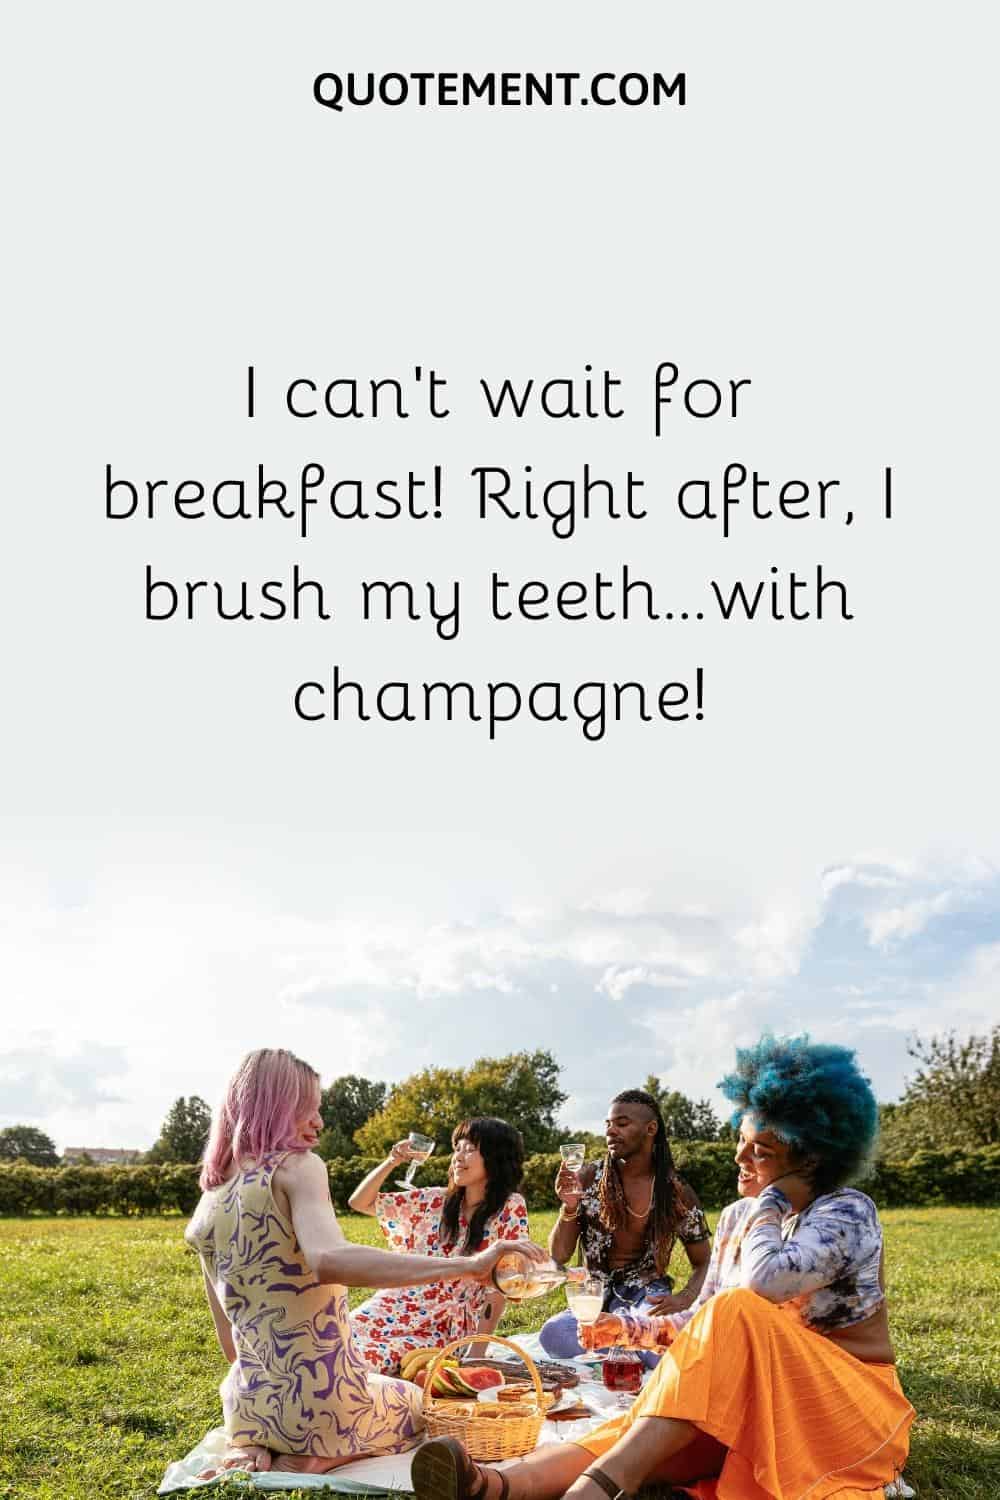 I can’t wait for breakfast! Right after, I brush my teeth…with champagne!